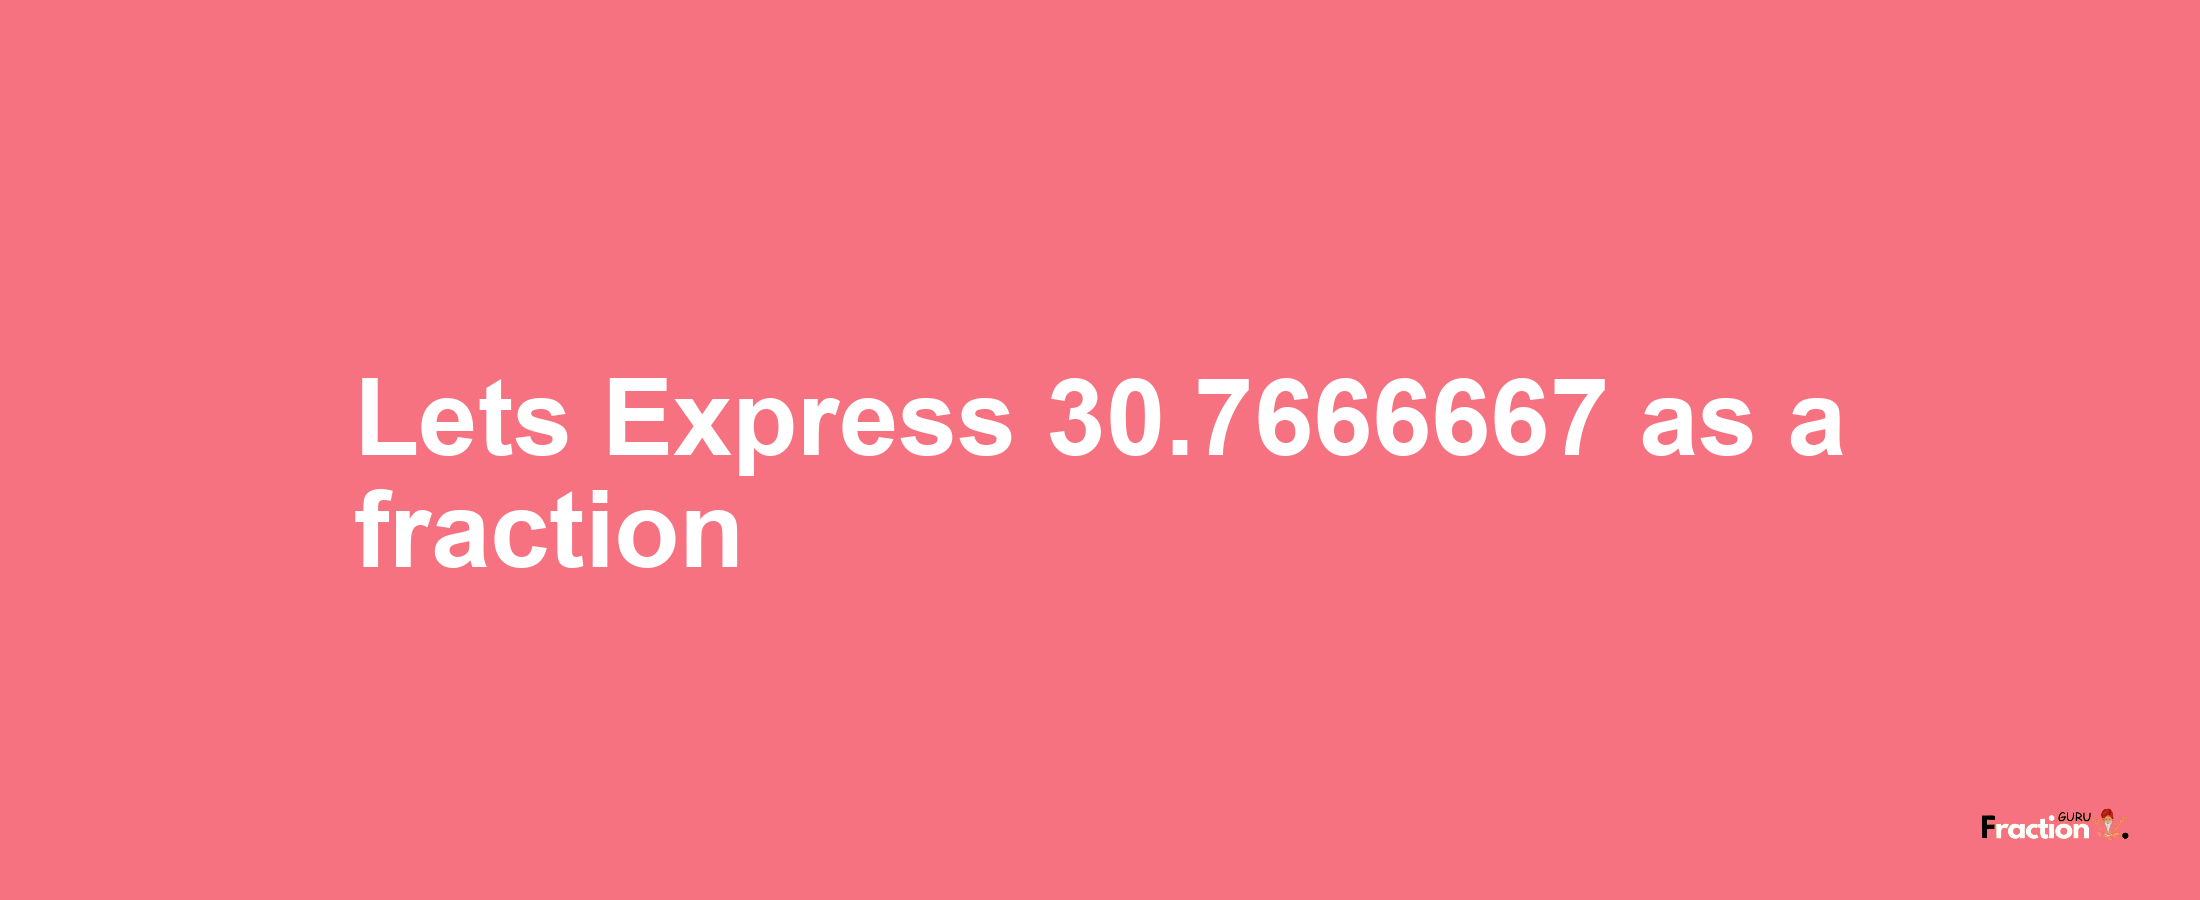 Lets Express 30.7666667 as afraction